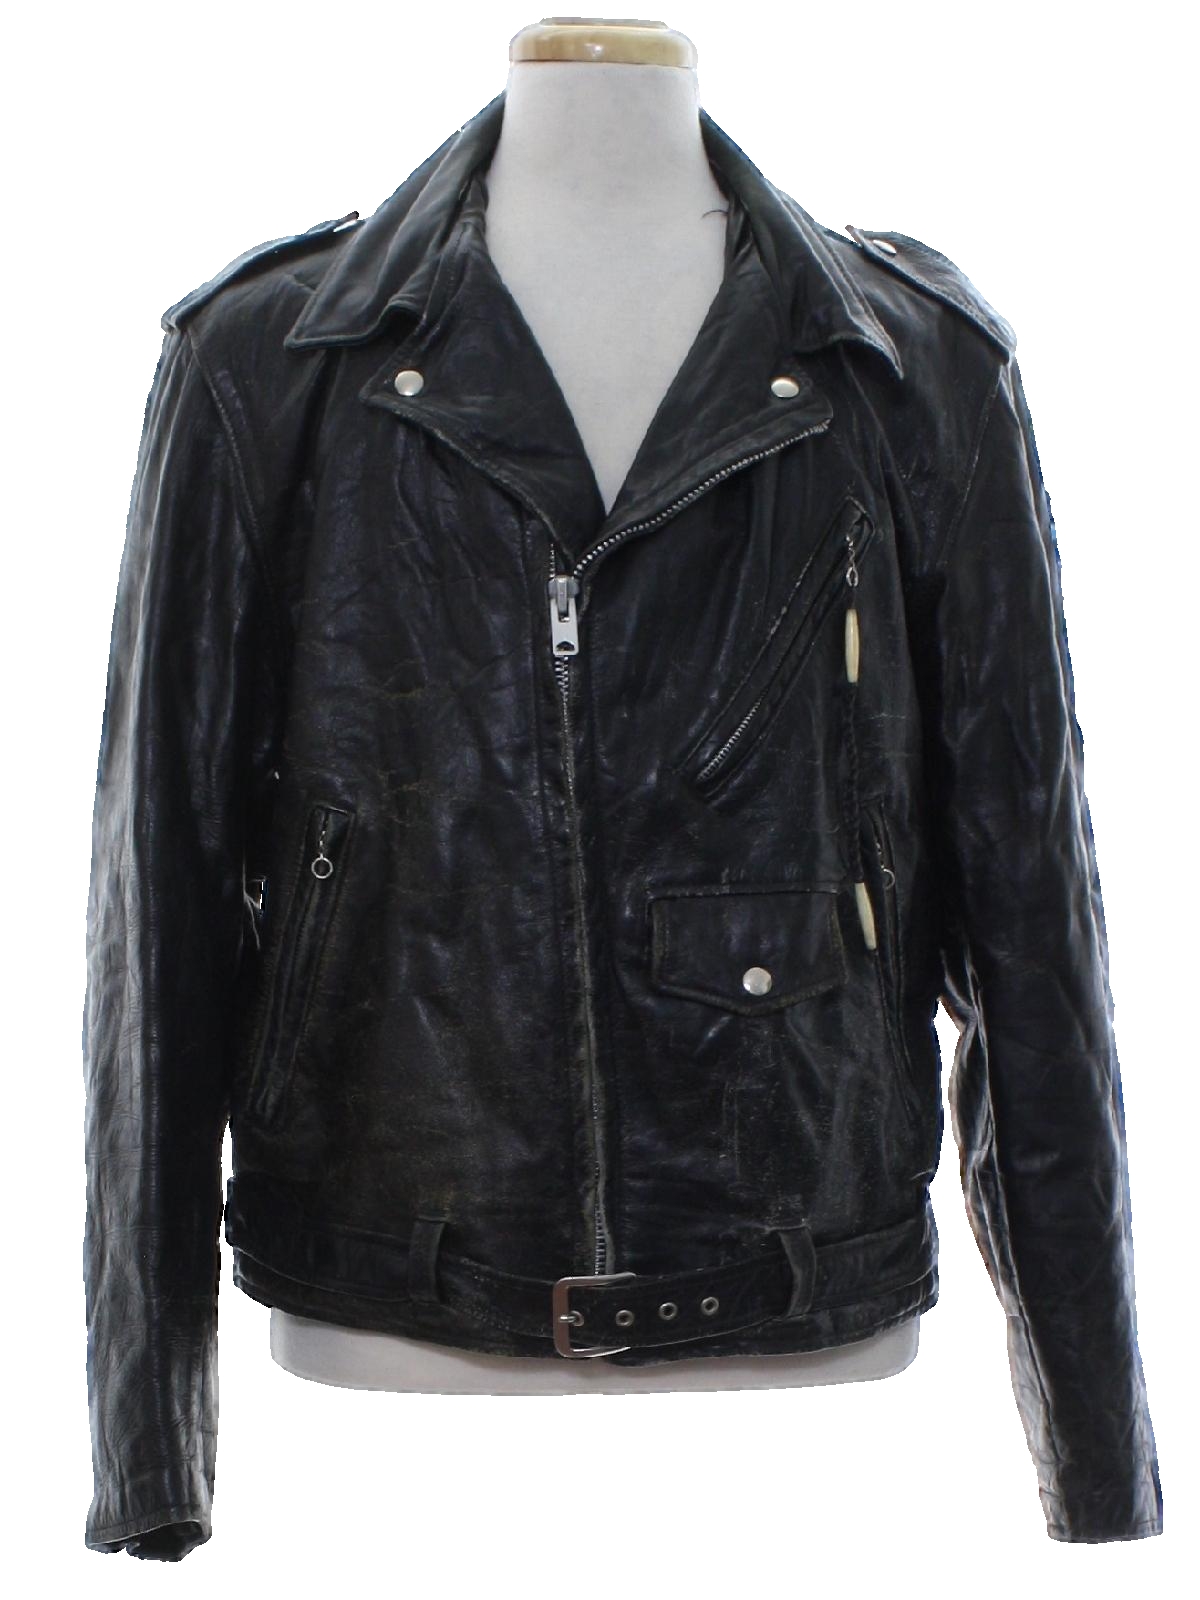 Retro 1970's Leather Jacket (Brent by Montgomery Ward) : 70s -Brent by ...